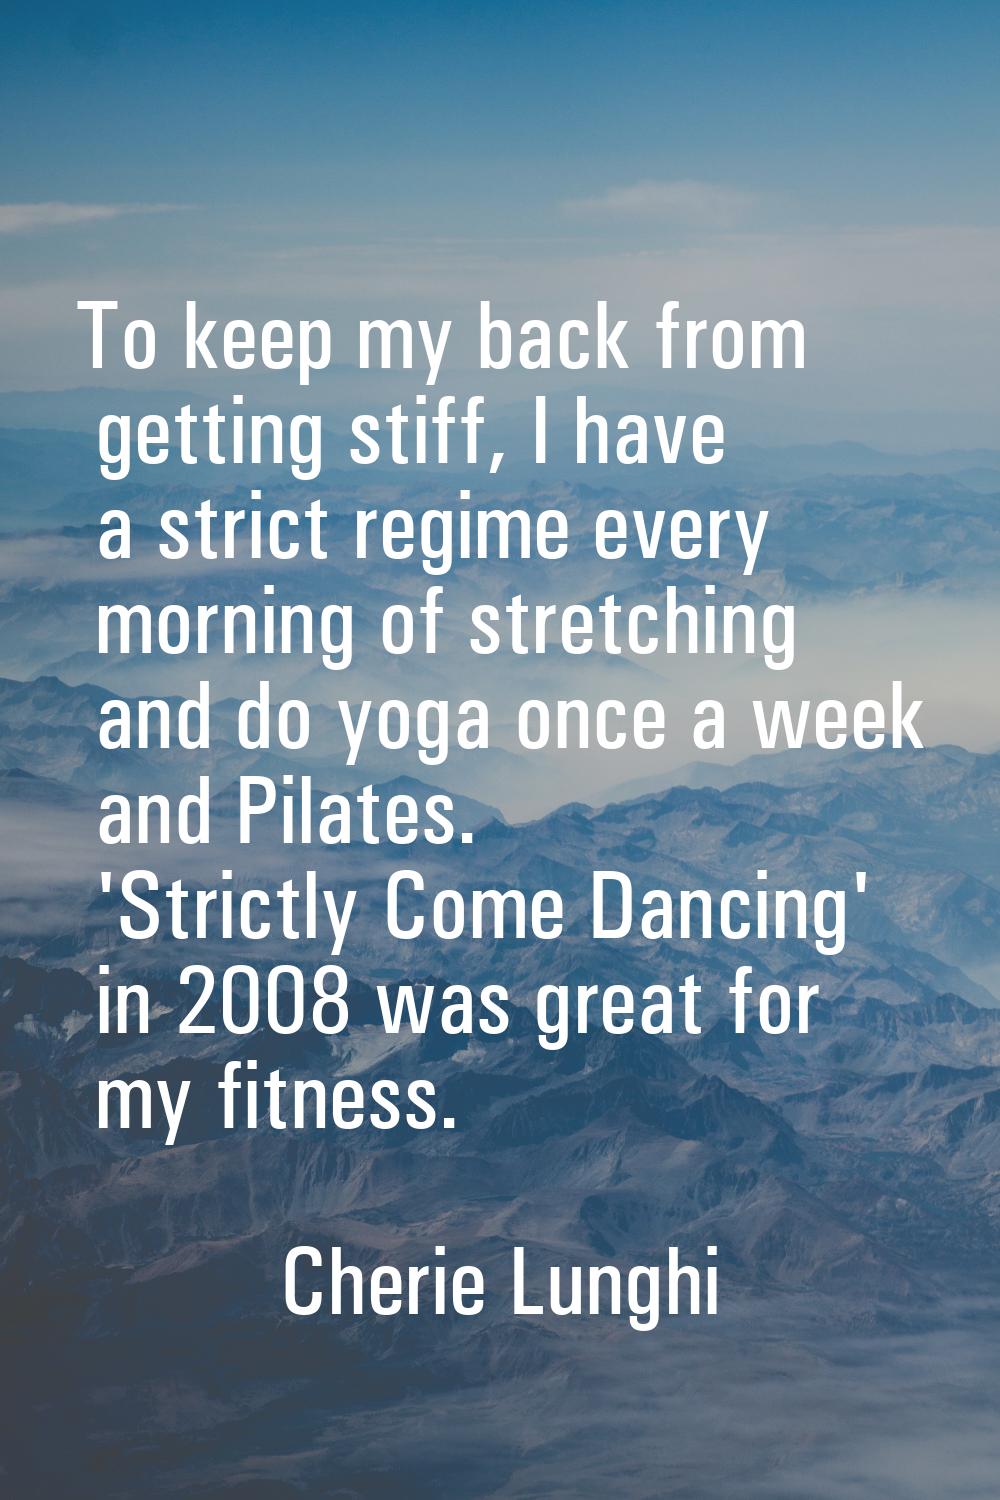 To keep my back from getting stiff, I have a strict regime every morning of stretching and do yoga 